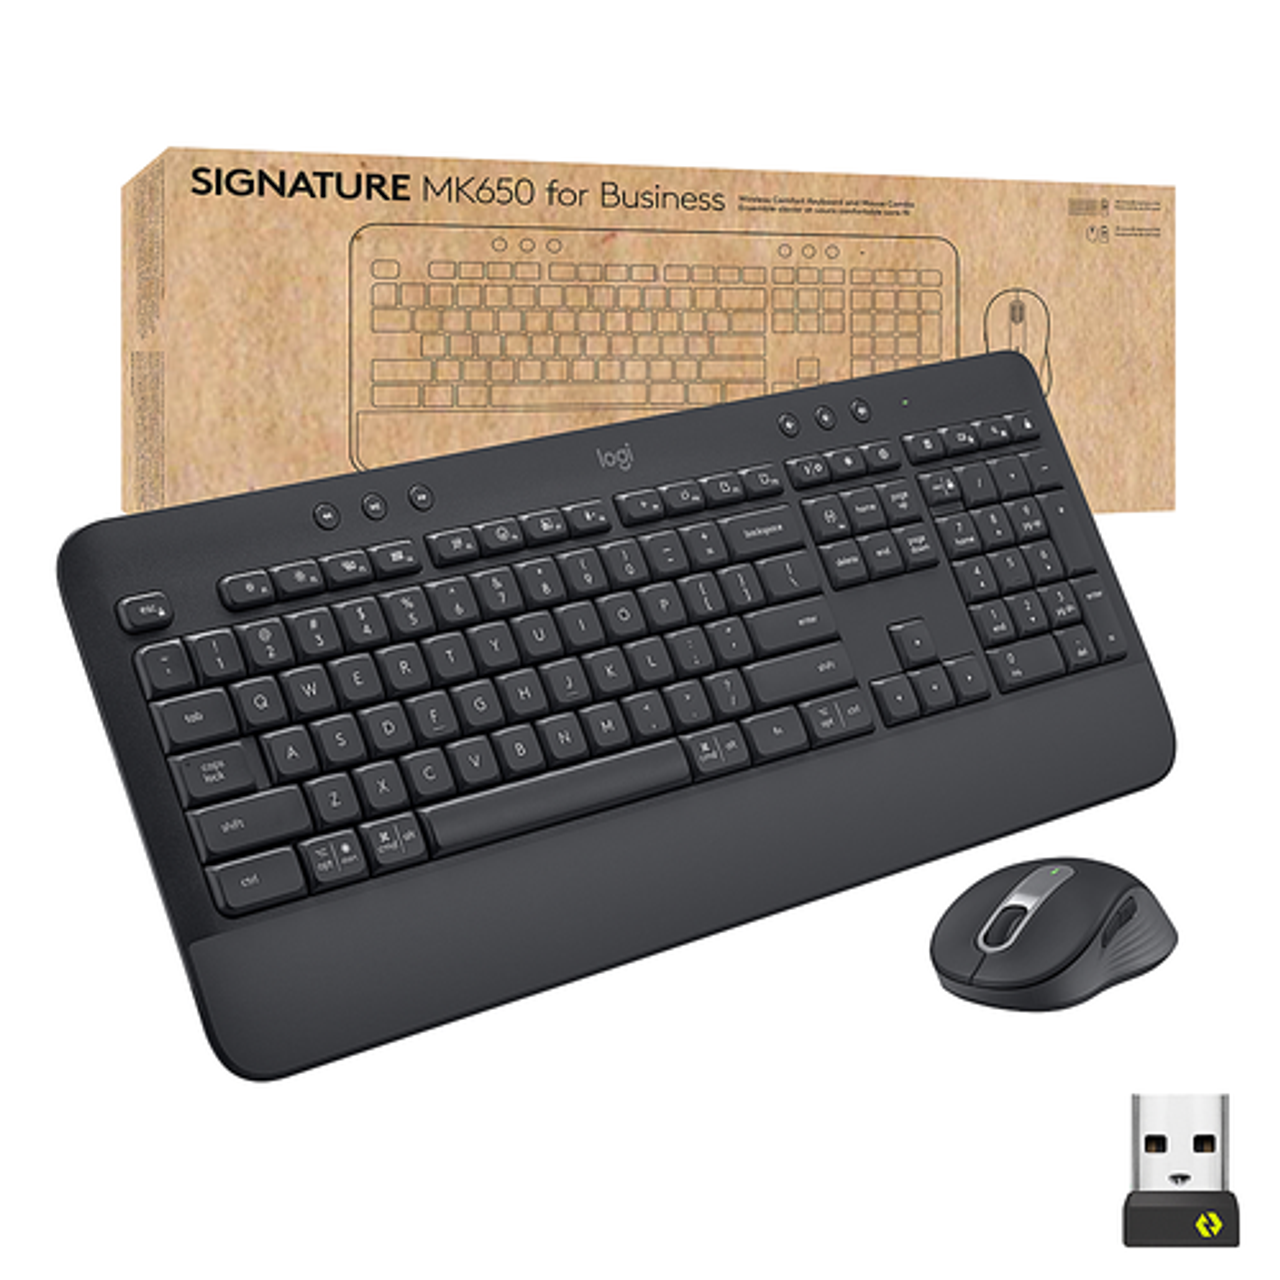 Logitech - Signature MK650 Combo for Business Full-size Wireless Keyboard and Mouse Bundle with Secure Logi Bolt Receiver - Graphite